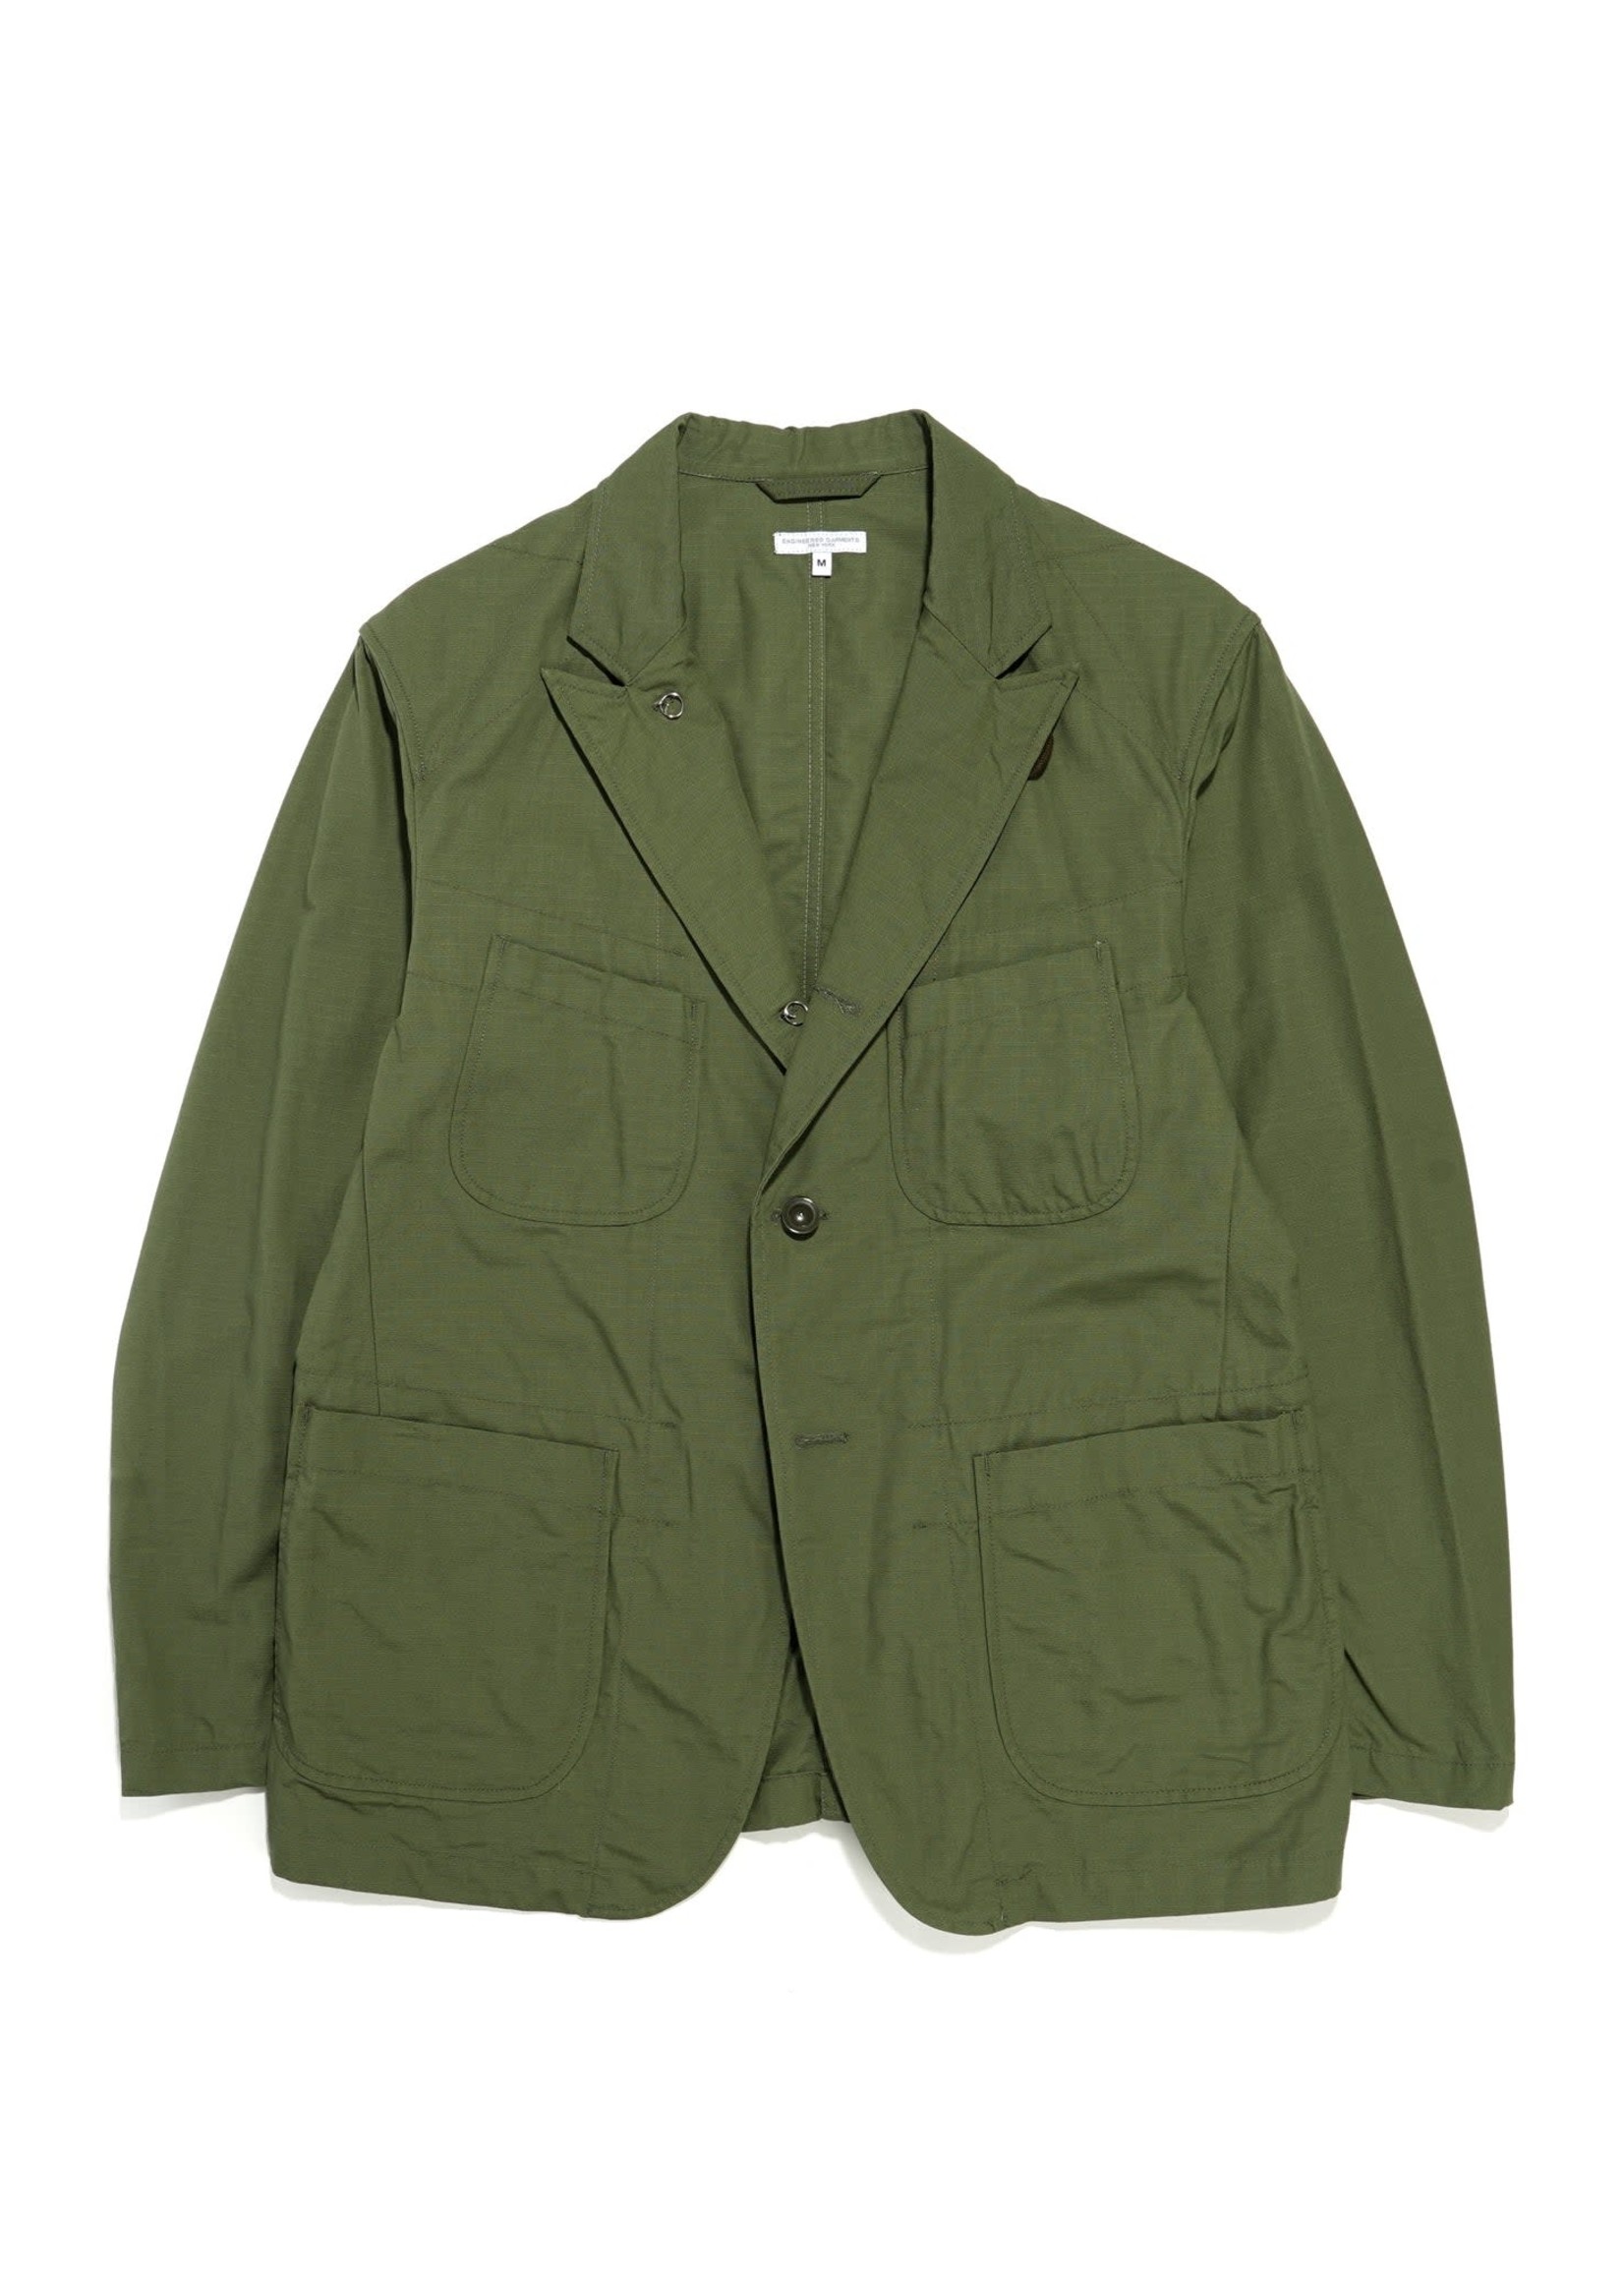 EG Bedford Jacket Olive Cotton Ripstop (22S1D005/CT010) - Drinkwater's ...